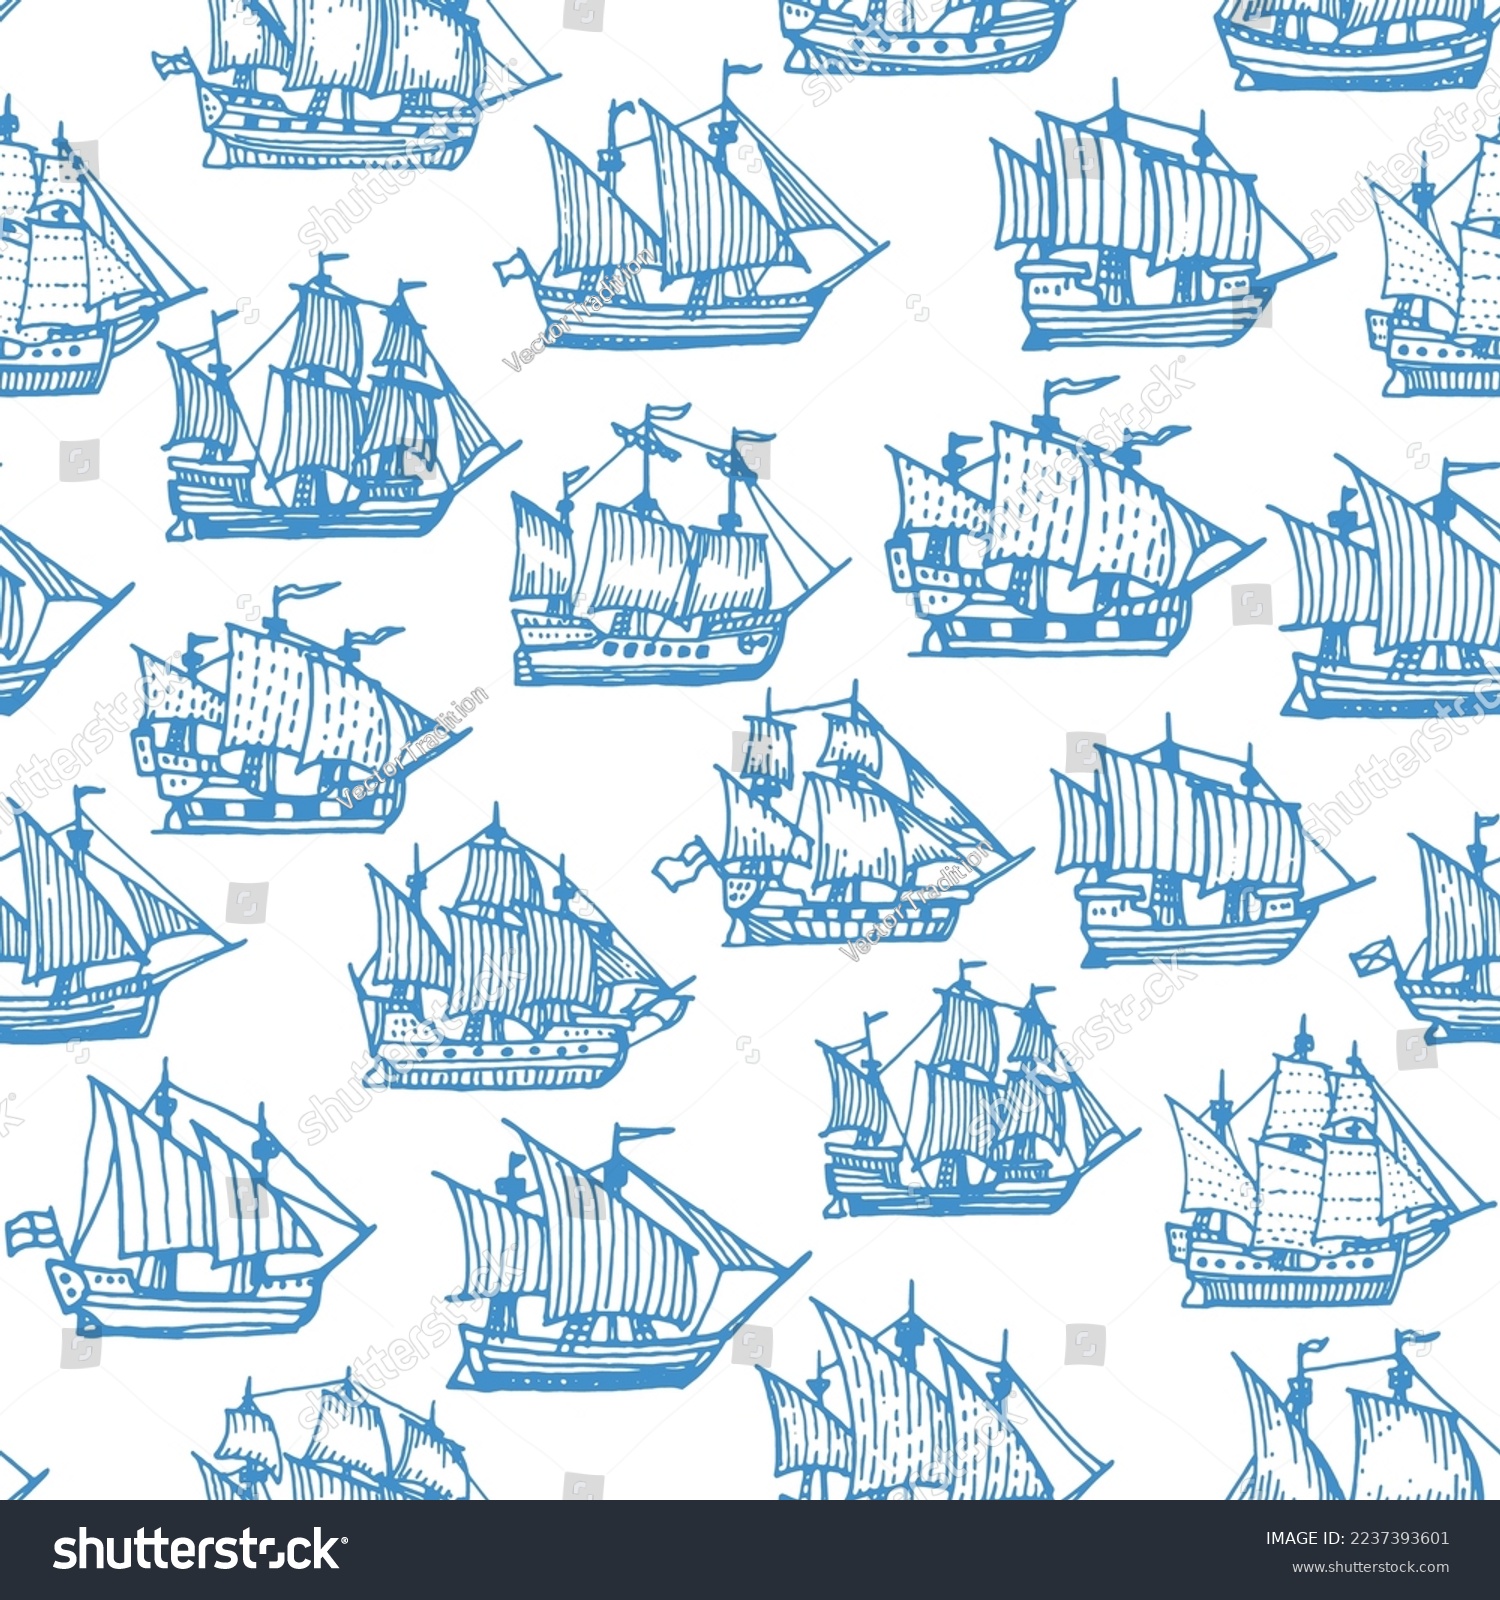 SVG of Sail ship, corvette, frigate and brigantine seamless pattern. Vintage vector sketch ornament with nautical boats with flags. Sea vessels, engraved blue galleons on white background, tile, wallpaper svg